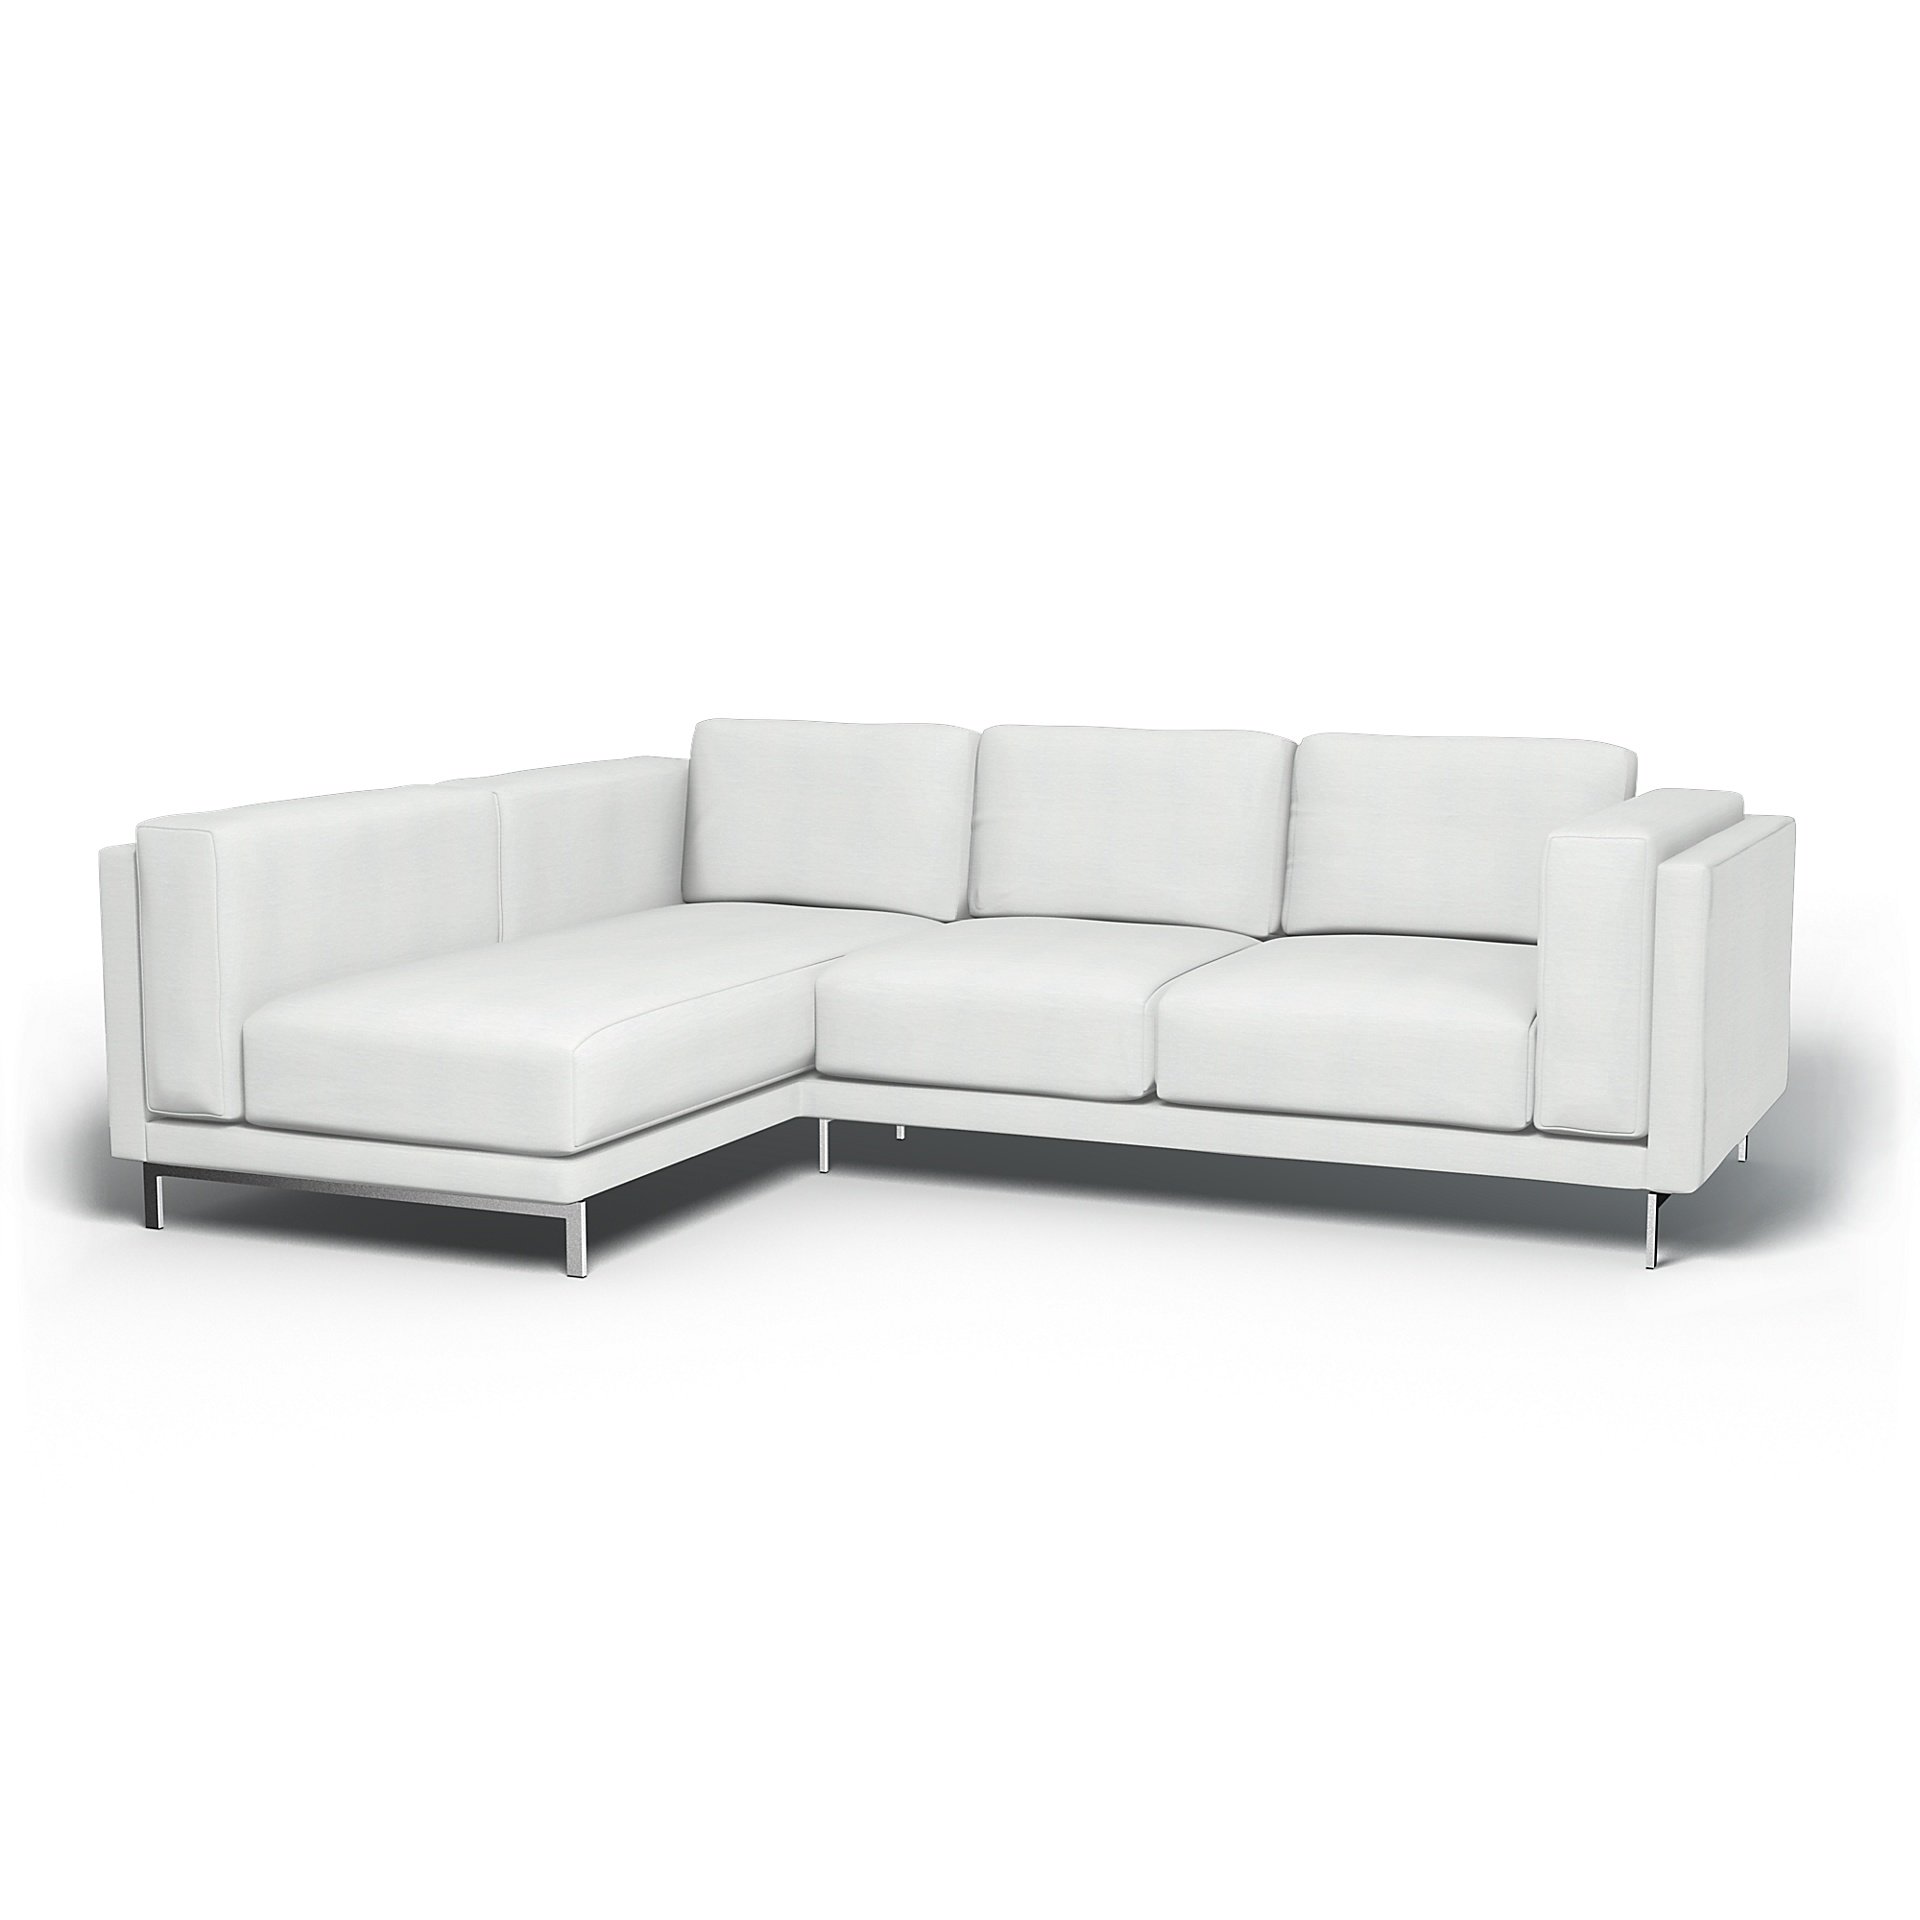 IKEA - Nockeby 3 Seater Sofa with Left Chaise Cover, White, Linen - Bemz